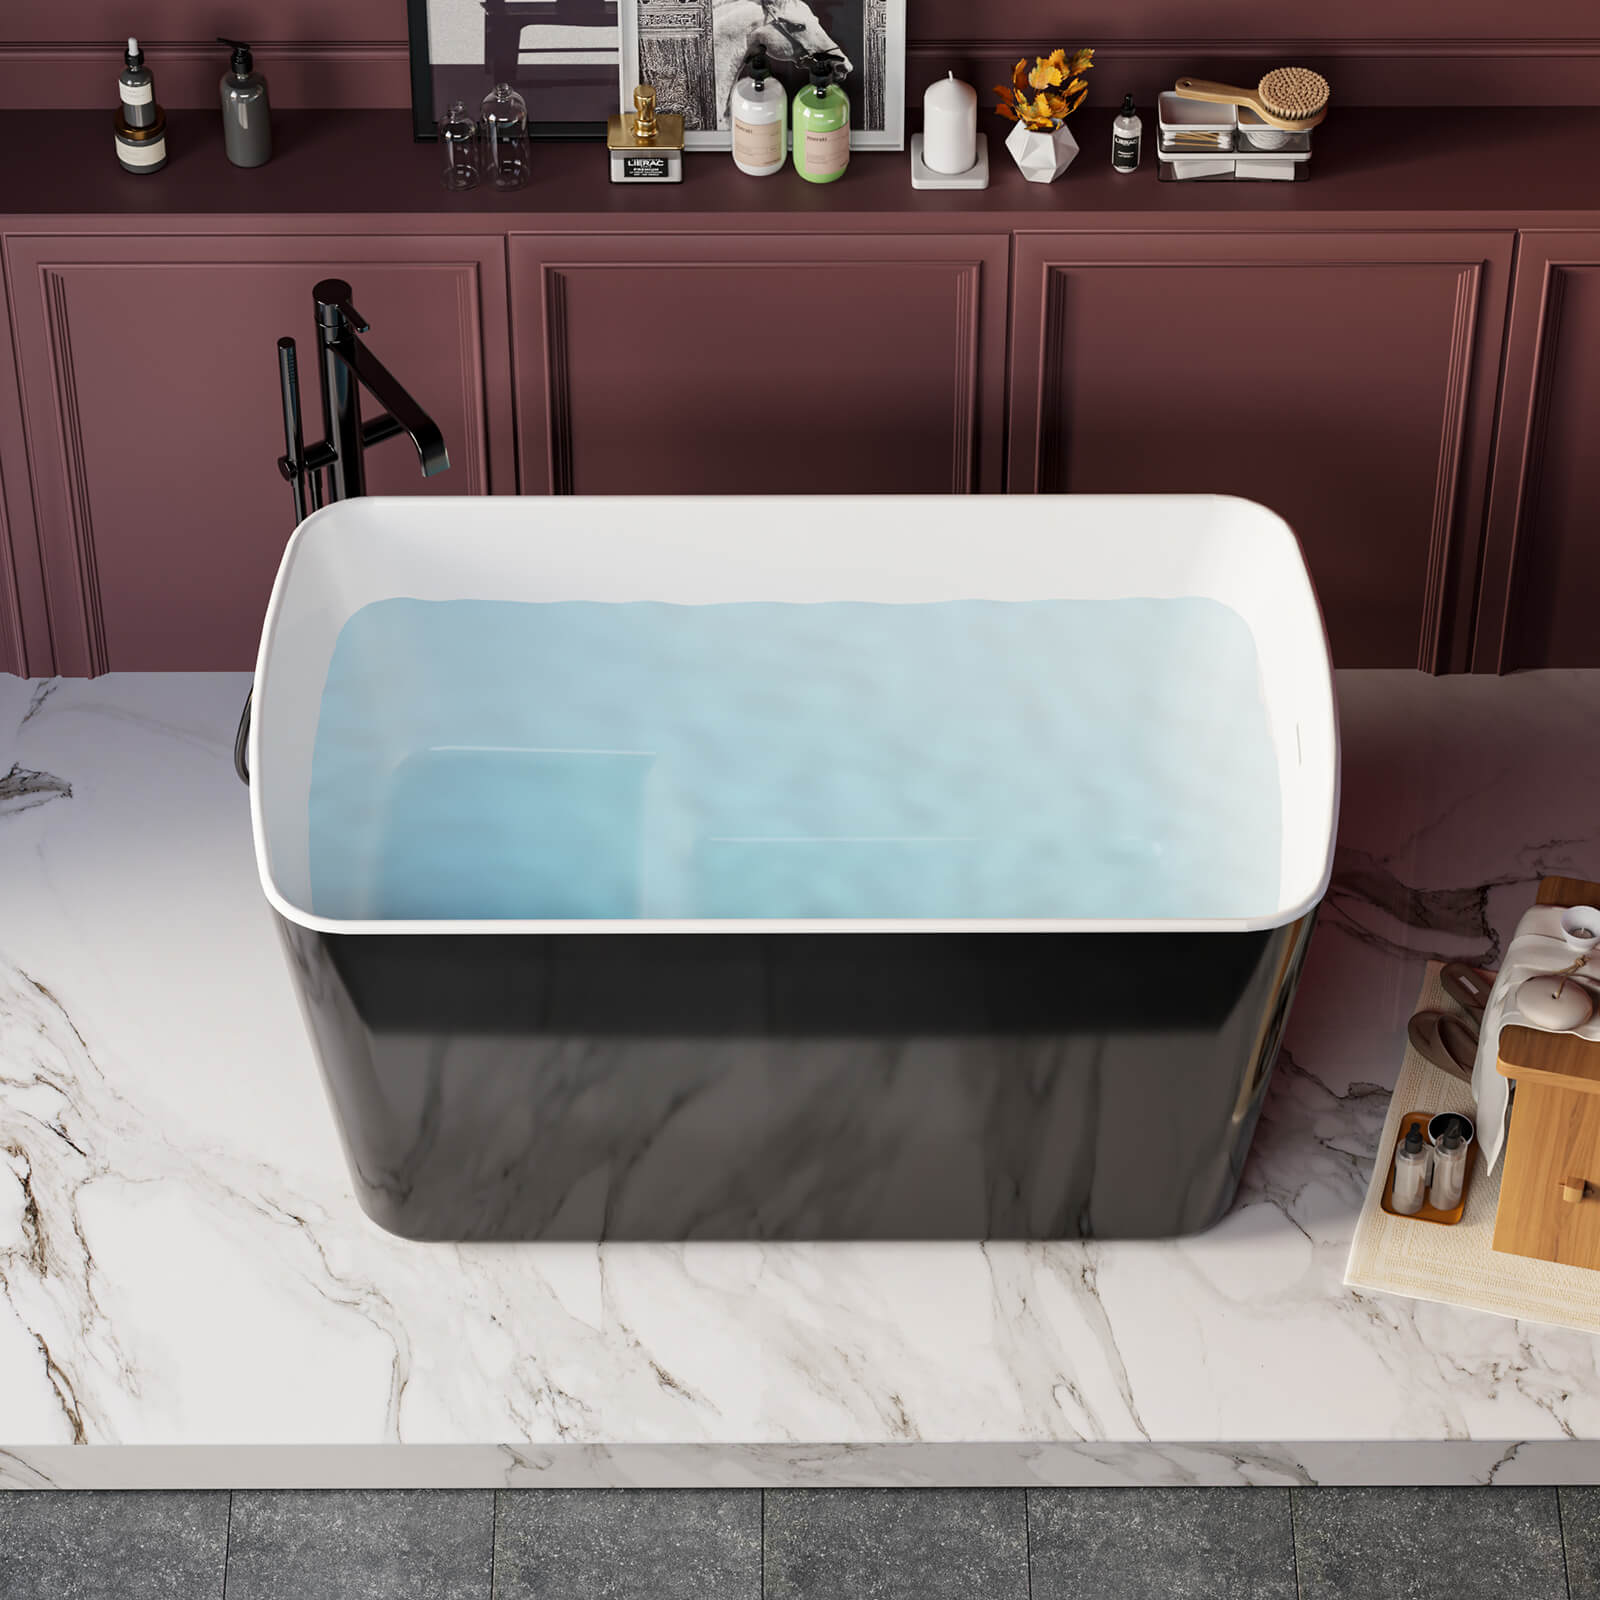 49 inch Small Size Sit In Soaking Tub